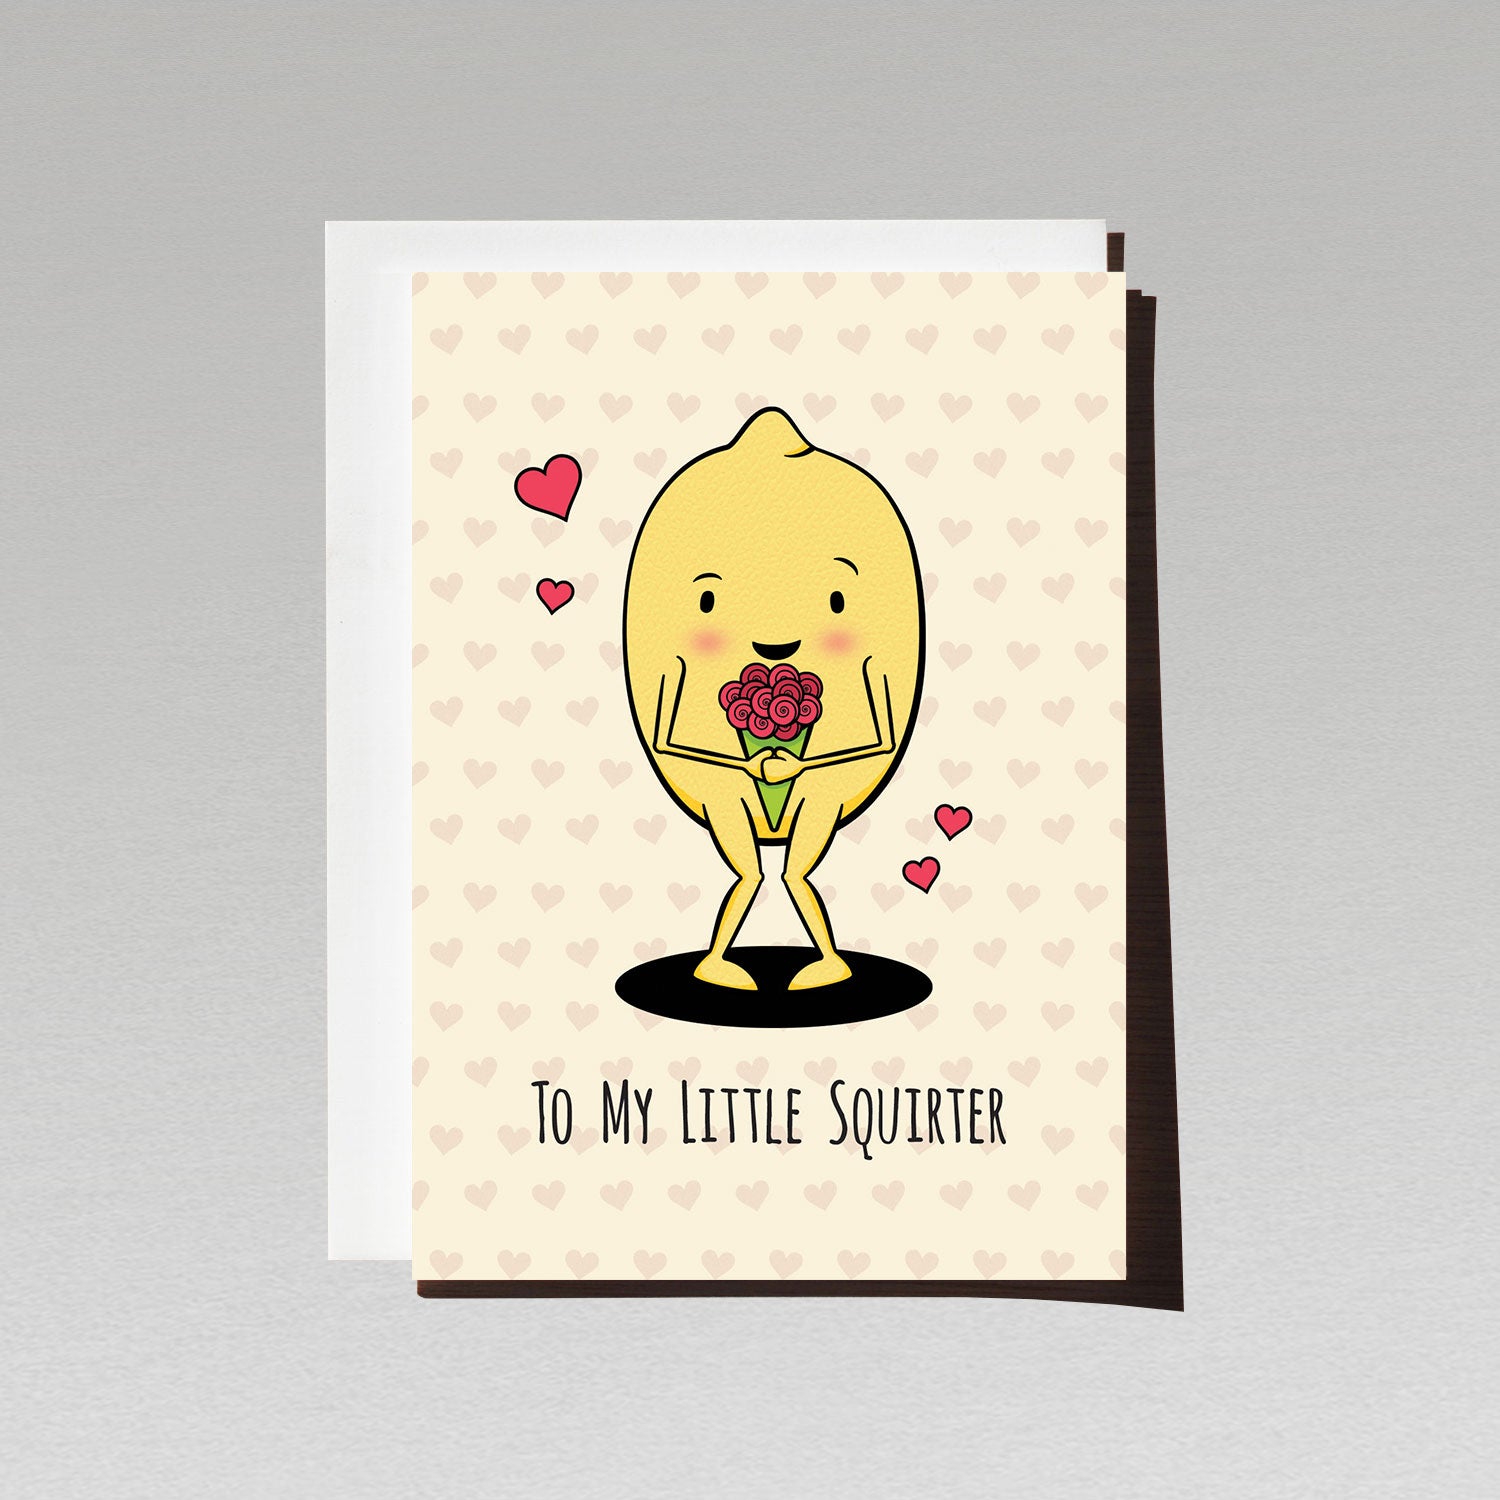 Cute lemon character holding bouquet of roses clencing knees on a pale yellow background with hearts and text To my little squirter